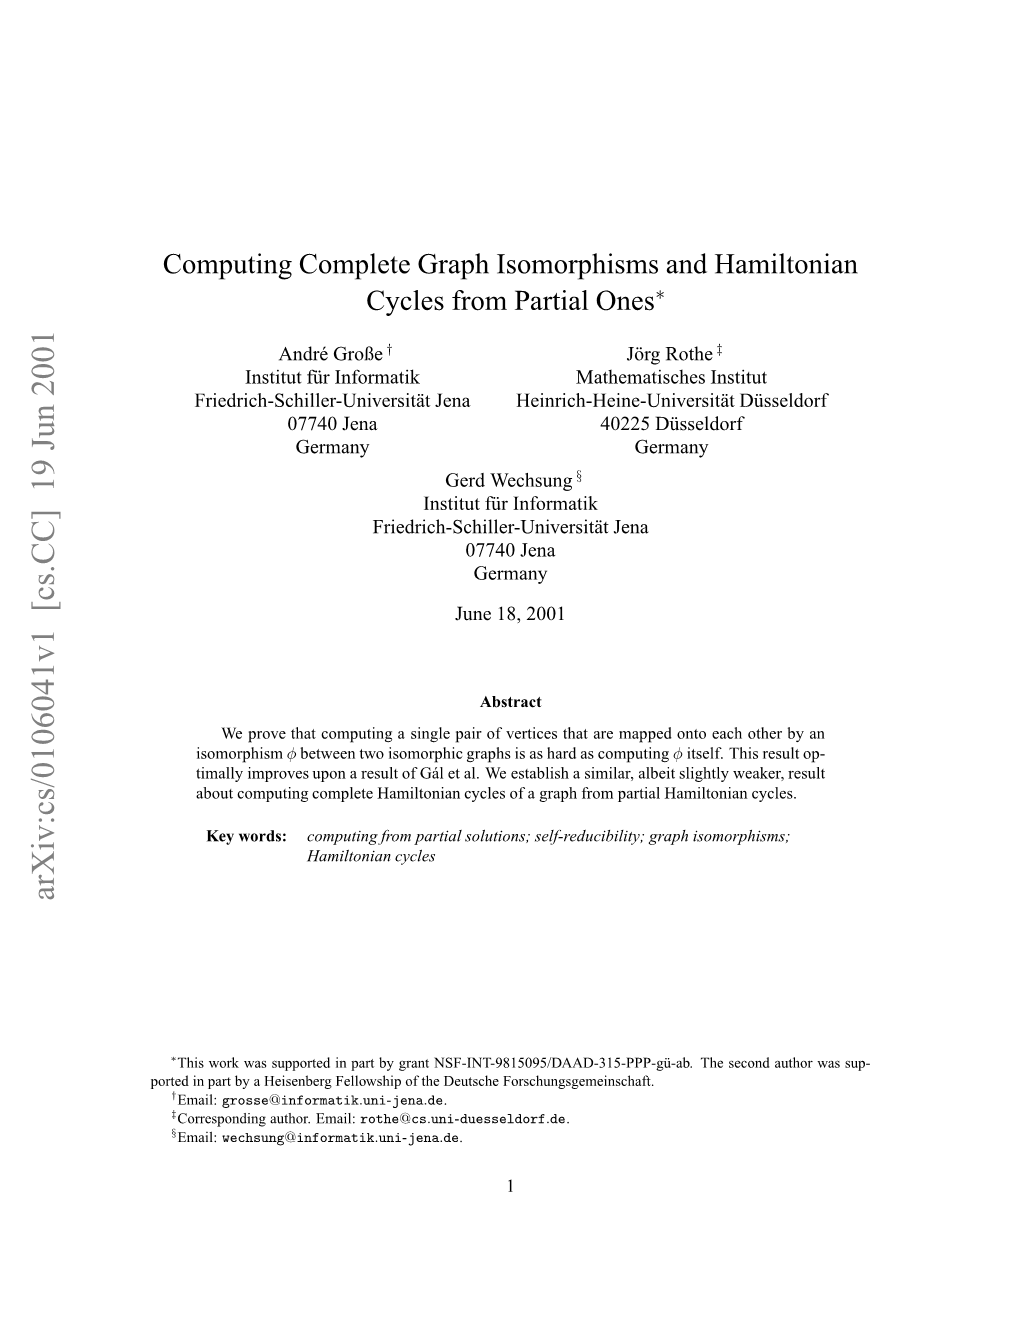 Computing Complete Graph Isomorphisms and Hamiltonian